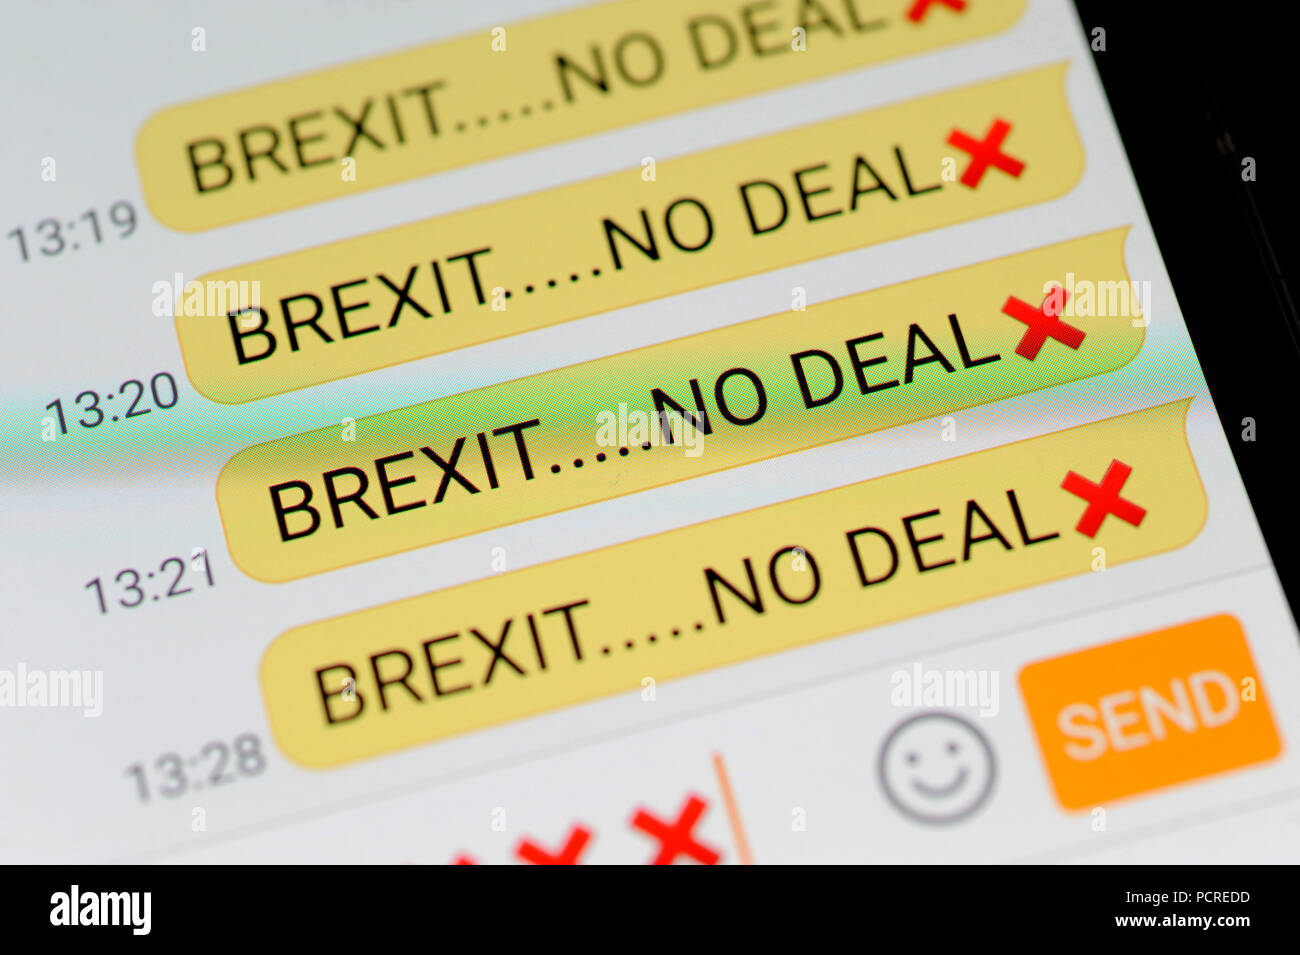 BREXIT NO DEAL MESSAGE ON SMARTPHONE RE NO TRADE DEAL BRUSSELS HARD BREXIT THE EU EUROPEAN UNION UK Stock Photo